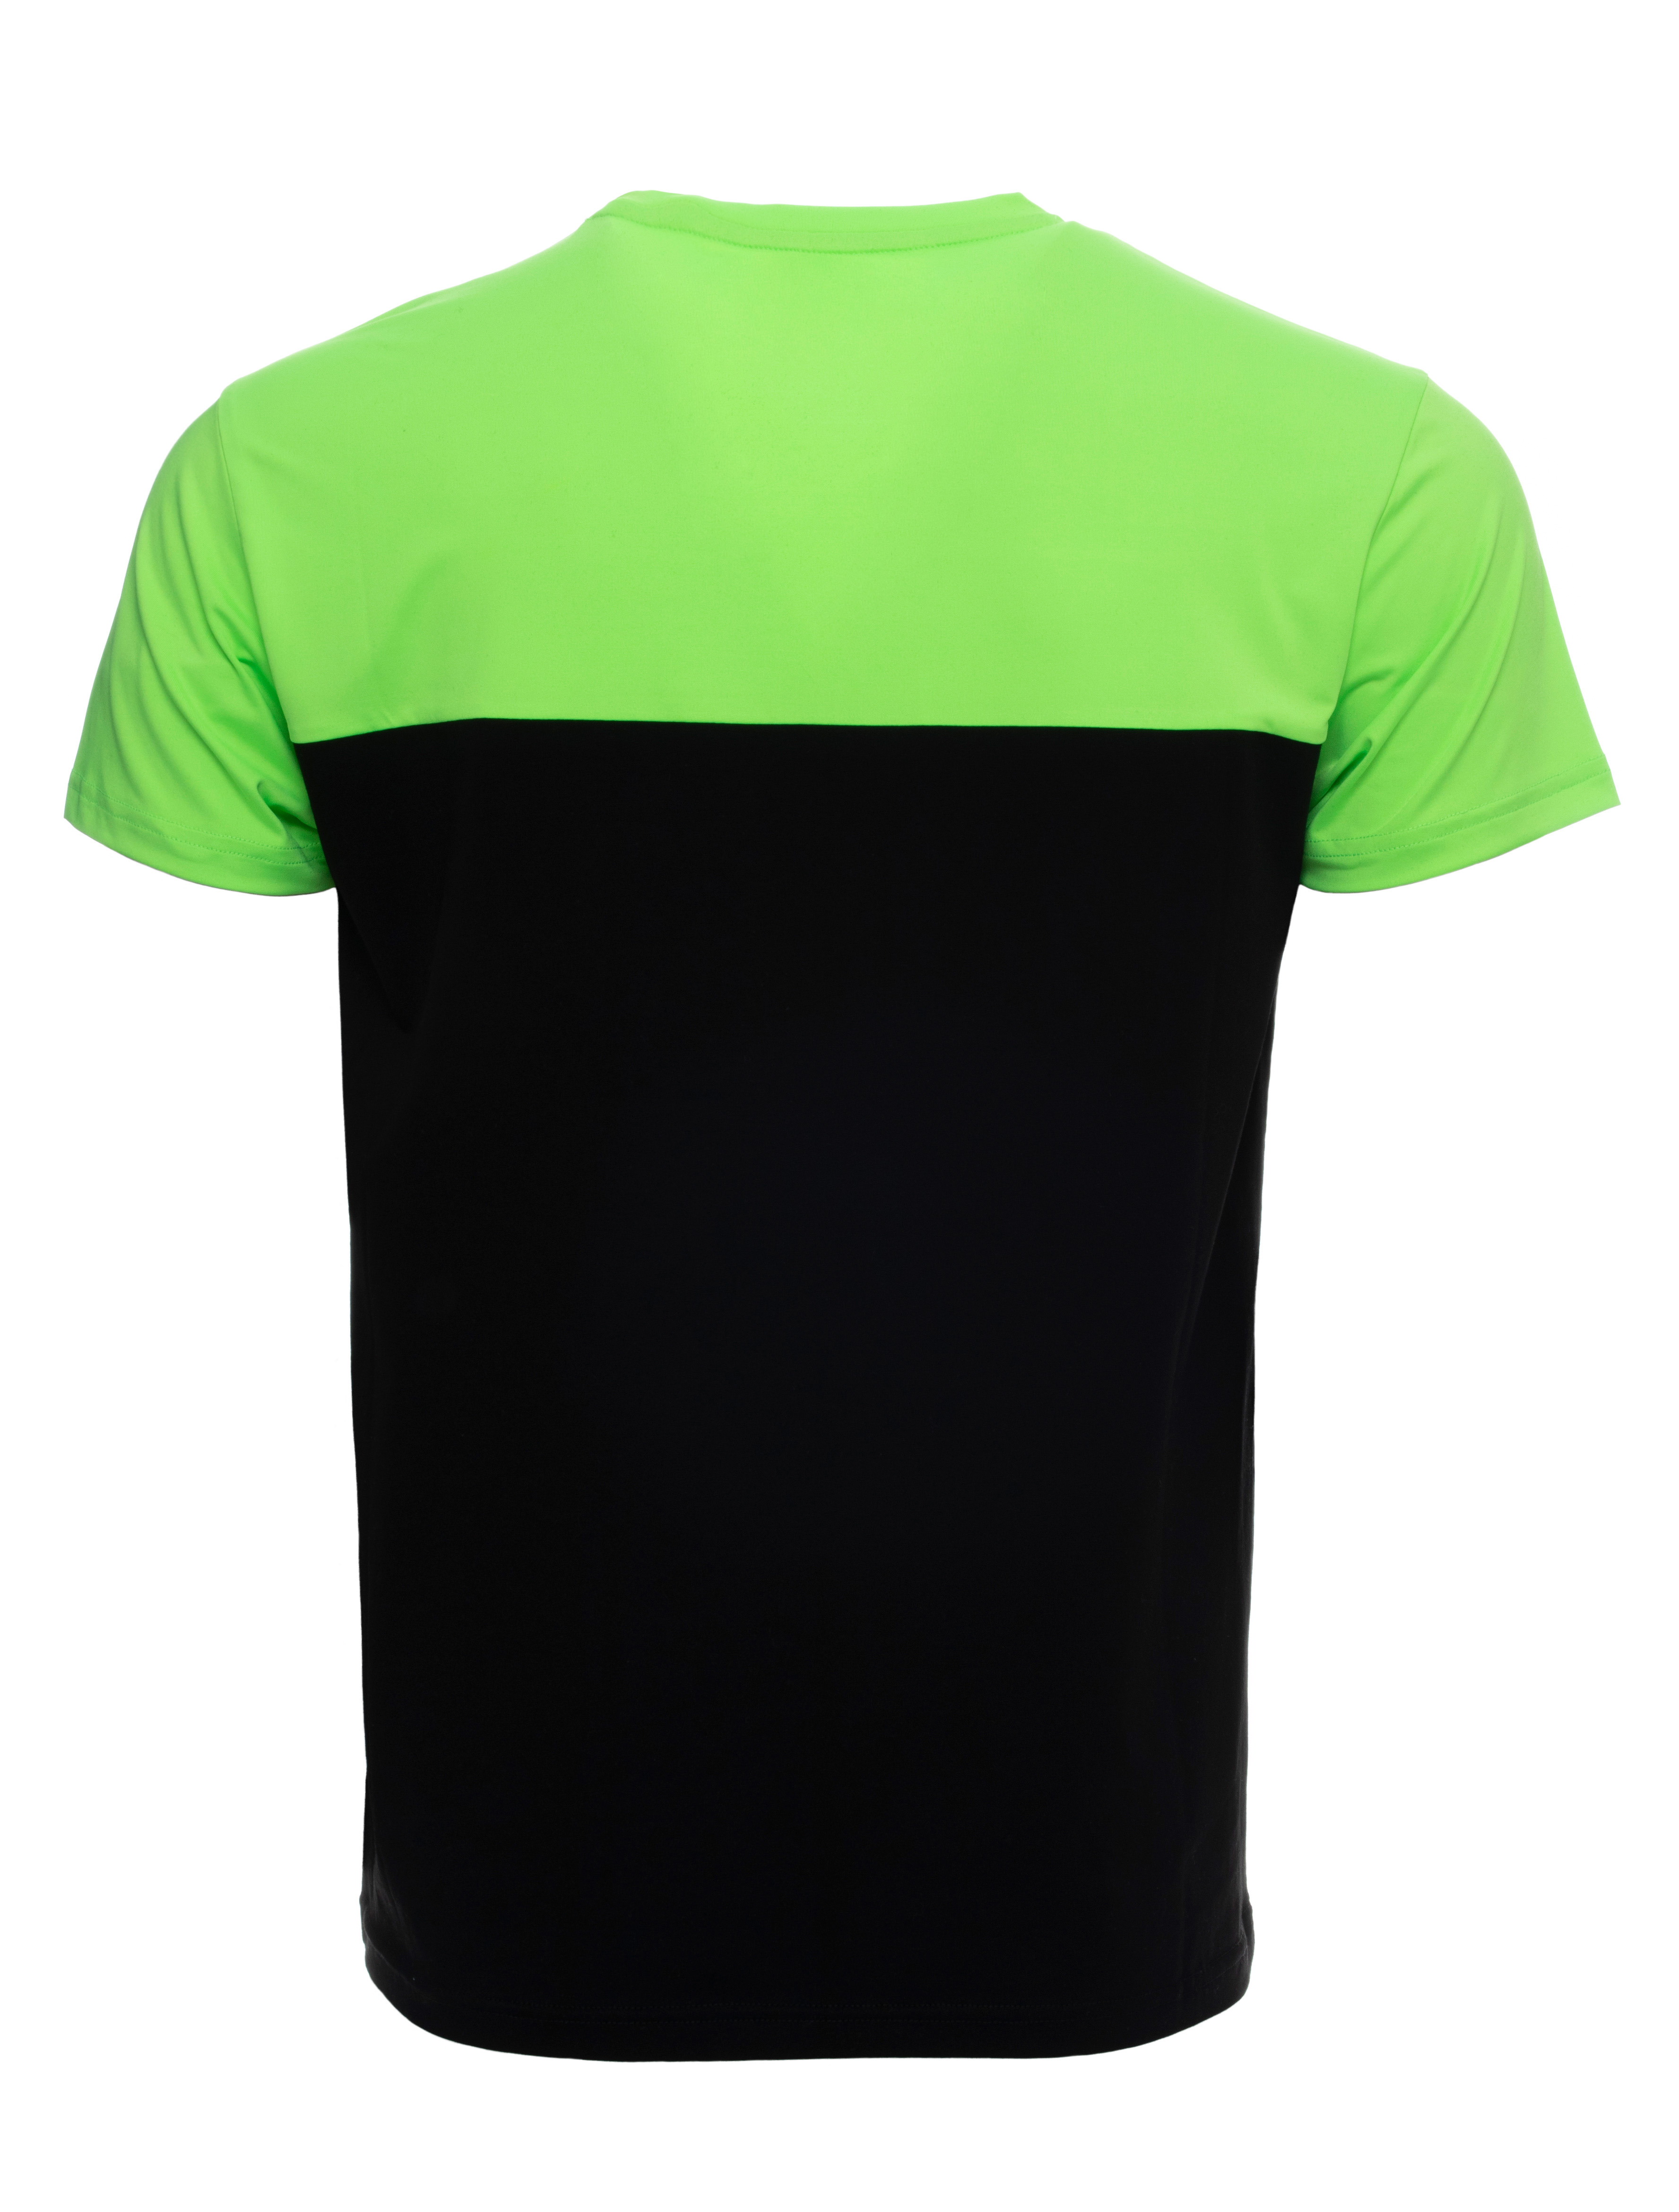 X RAY Men's Soft Stretch Cotton Solid Colorblock Short Sleeve V-Neck Slim Fit T-Shirt, Fashion Sport Casual Tee for Men, Black/Neon Green Size Large - image 2 of 4